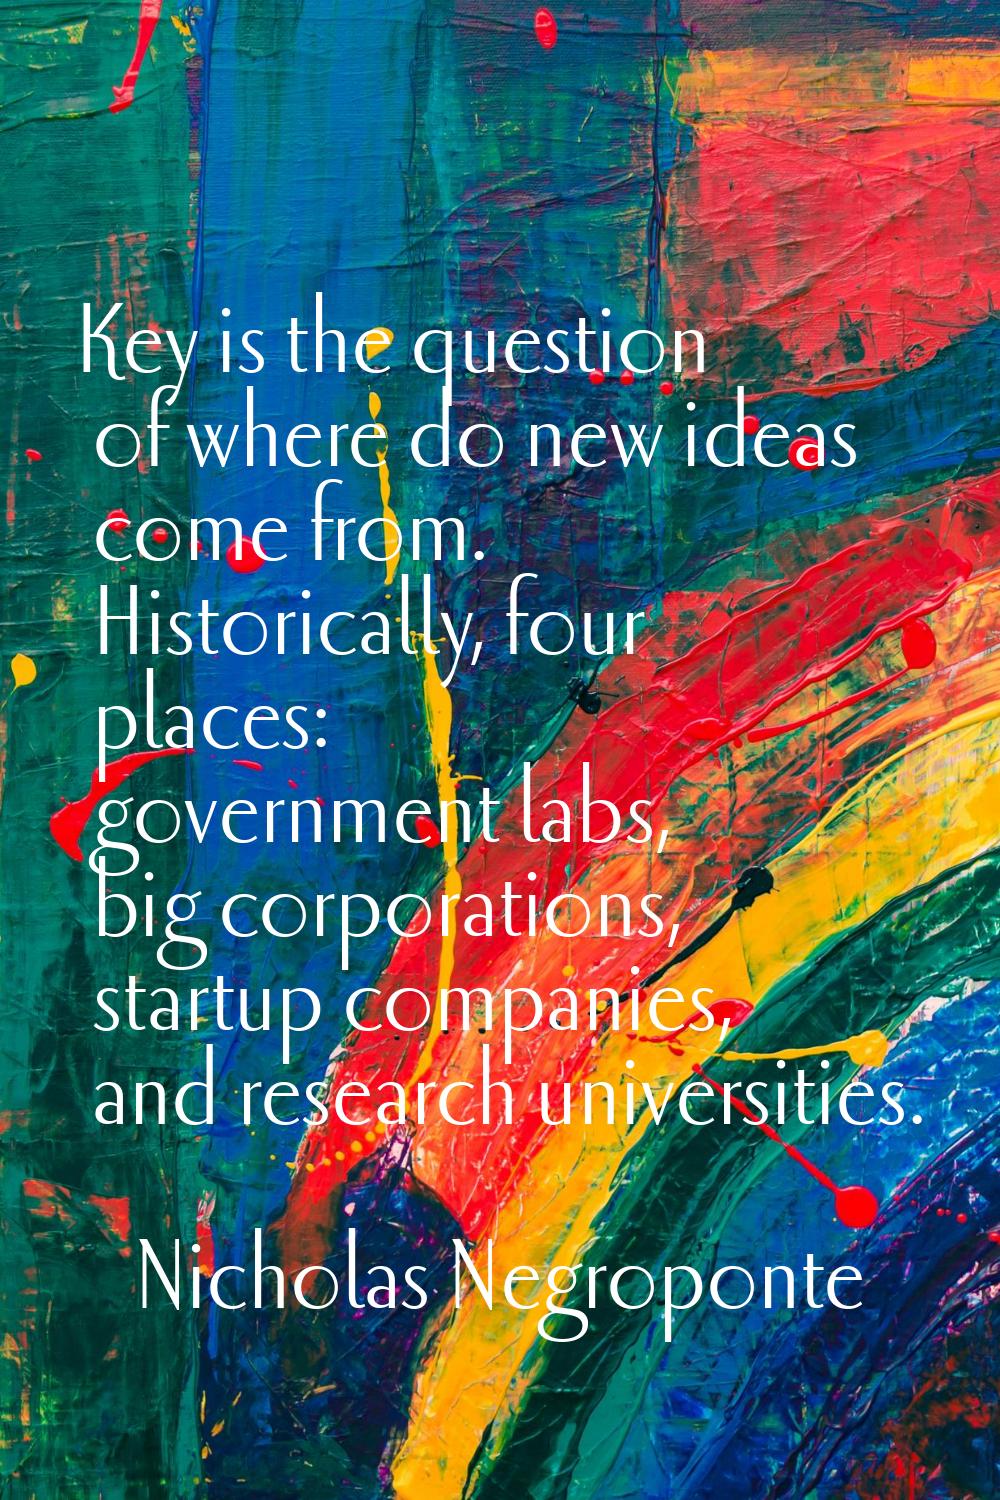 Key is the question of where do new ideas come from. Historically, four places: government labs, bi